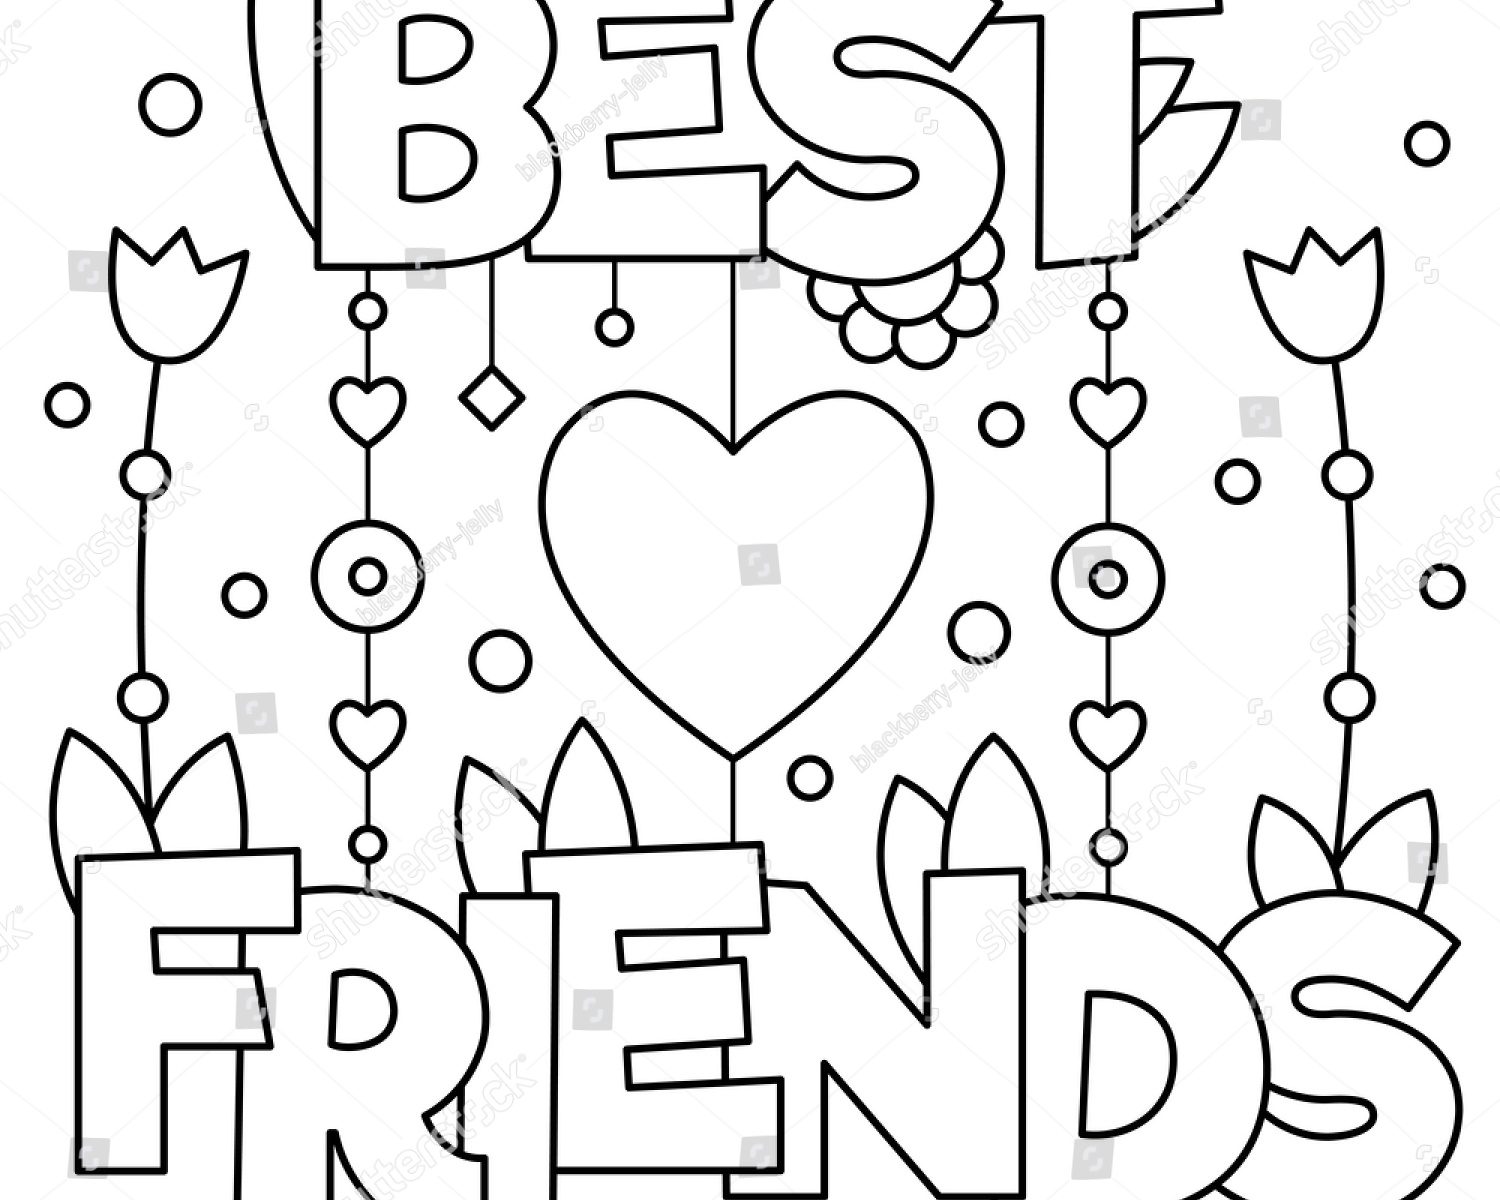 Two Best Friends Coloring Pages at GetColorings.com | Free printable